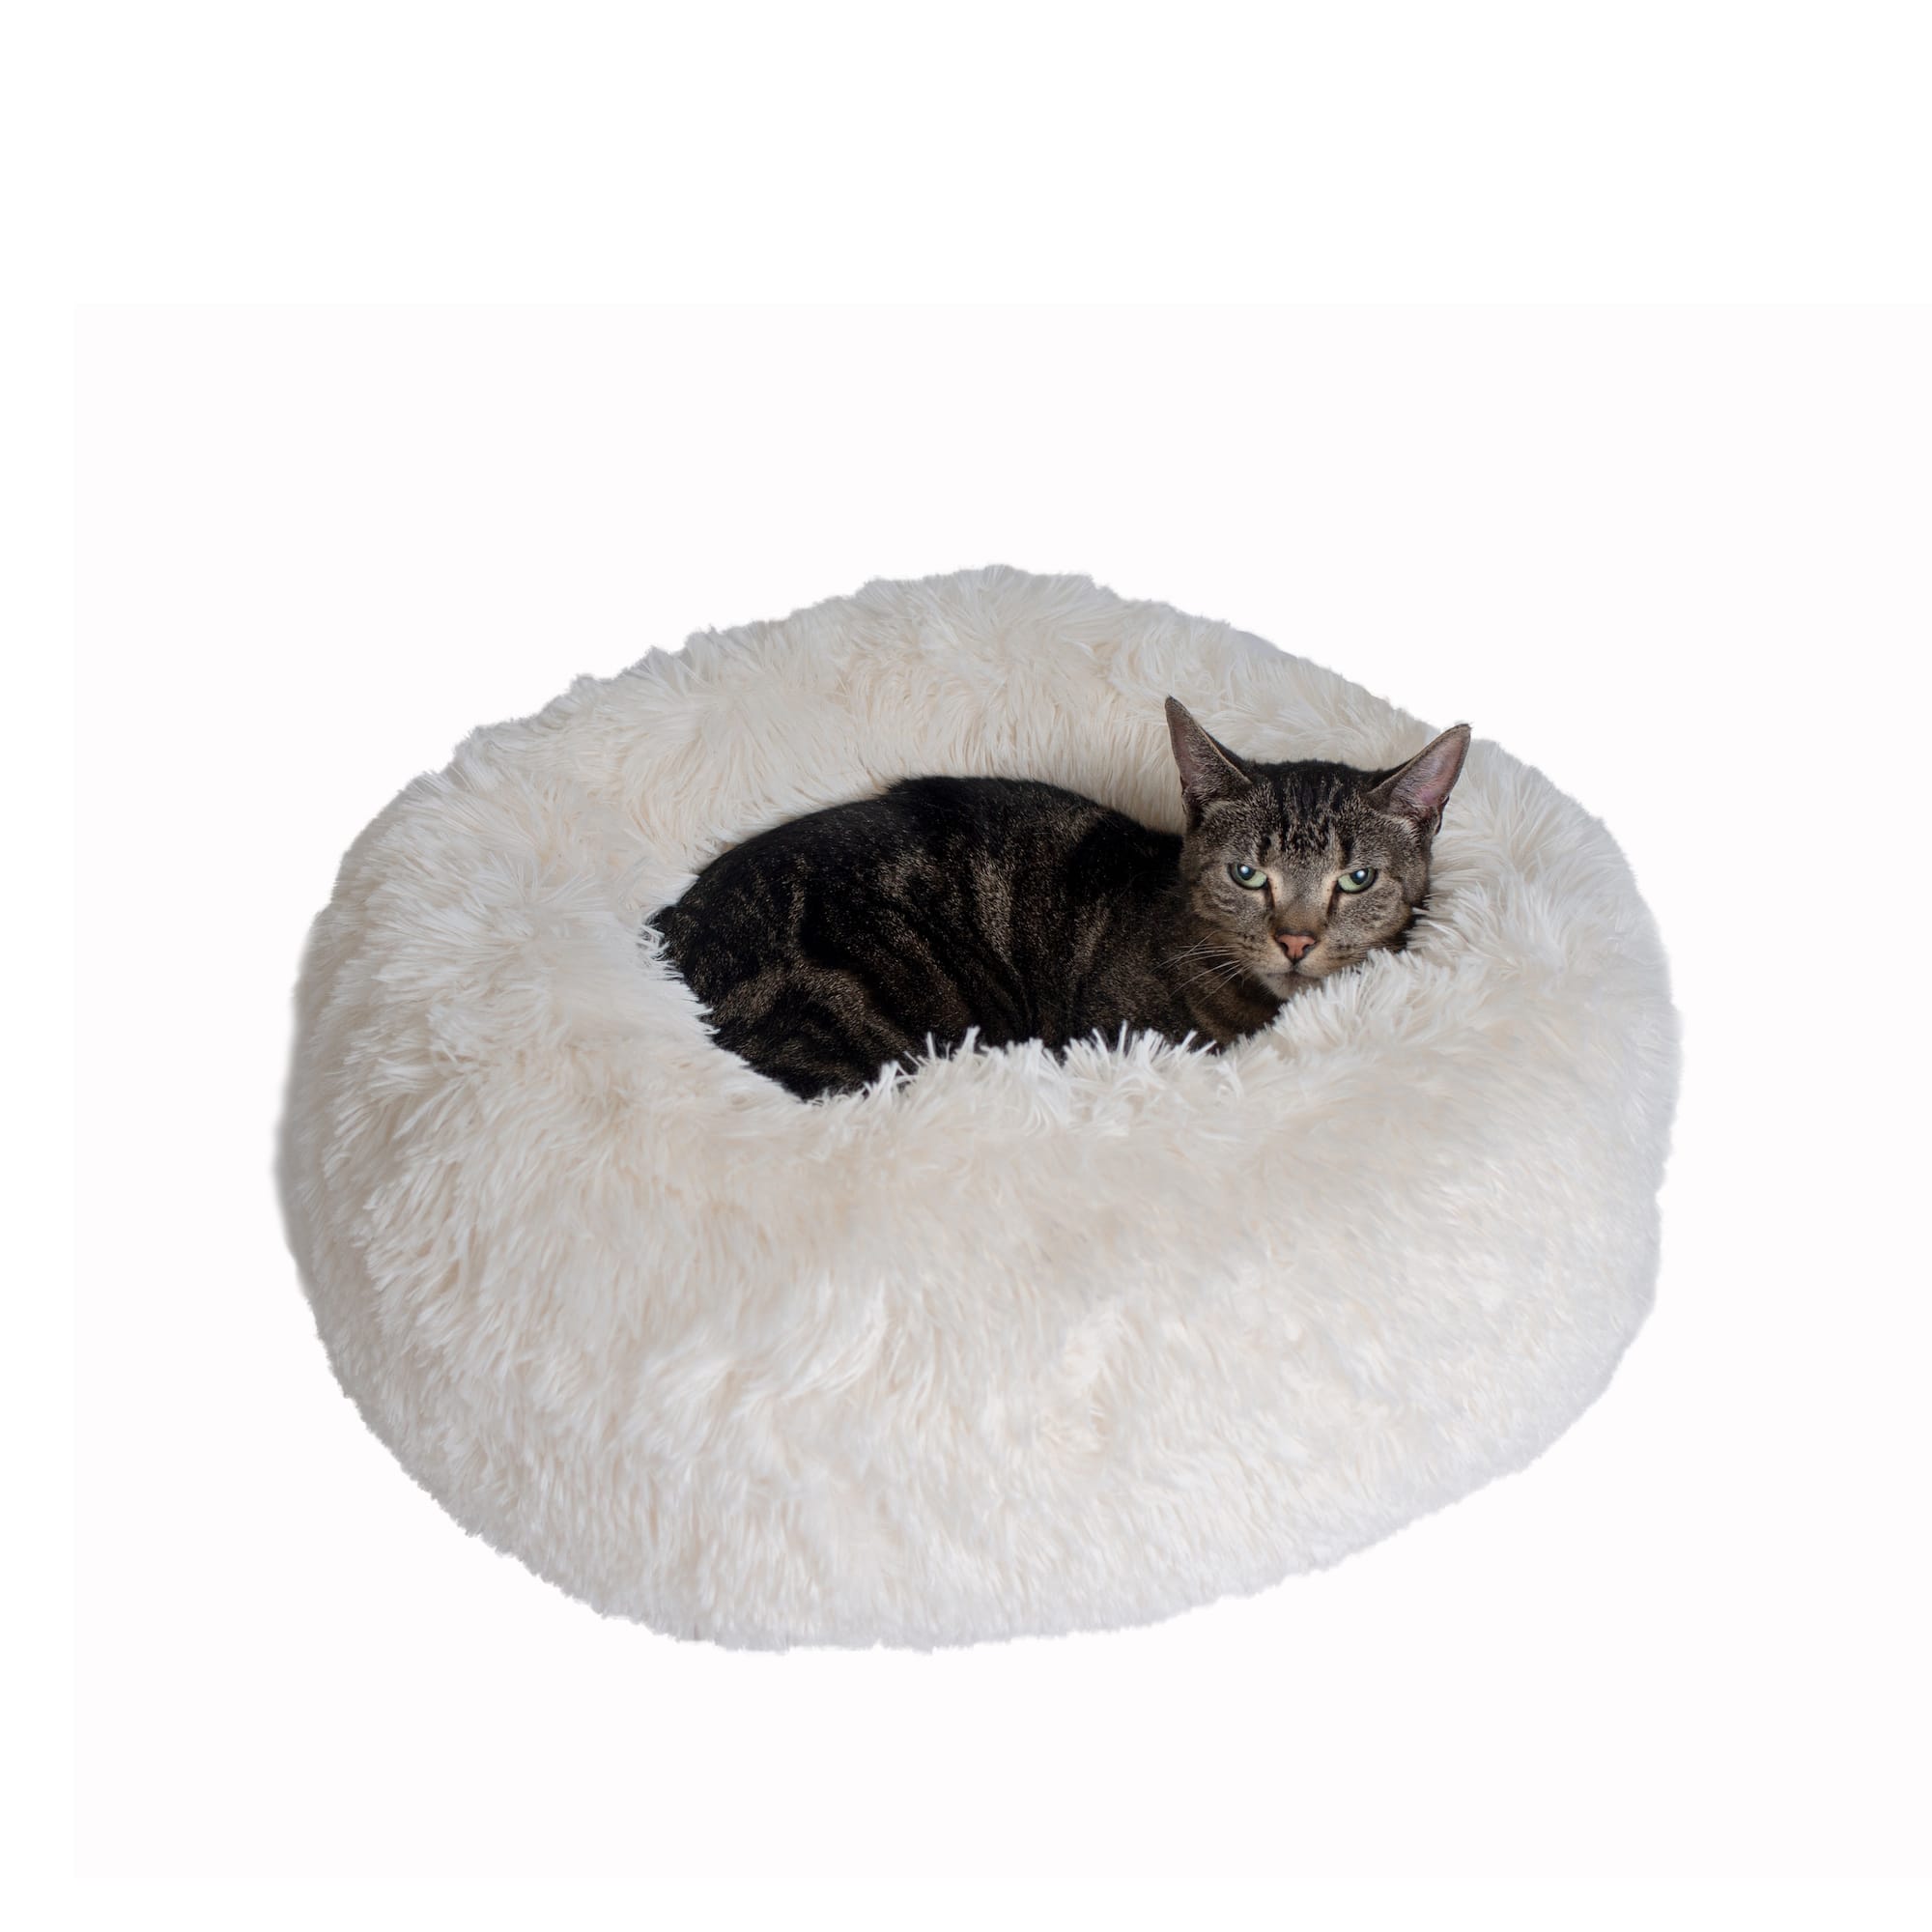 XXL & XXXL Dog Pets Pillow Bed Best for Small Cat & Kittens Medium Paws & Pals Pet Beds for Dogs and Cats 2019 Newly Designed Indestructible Cuddler Couch Washable Accessories XL Puppy Large 